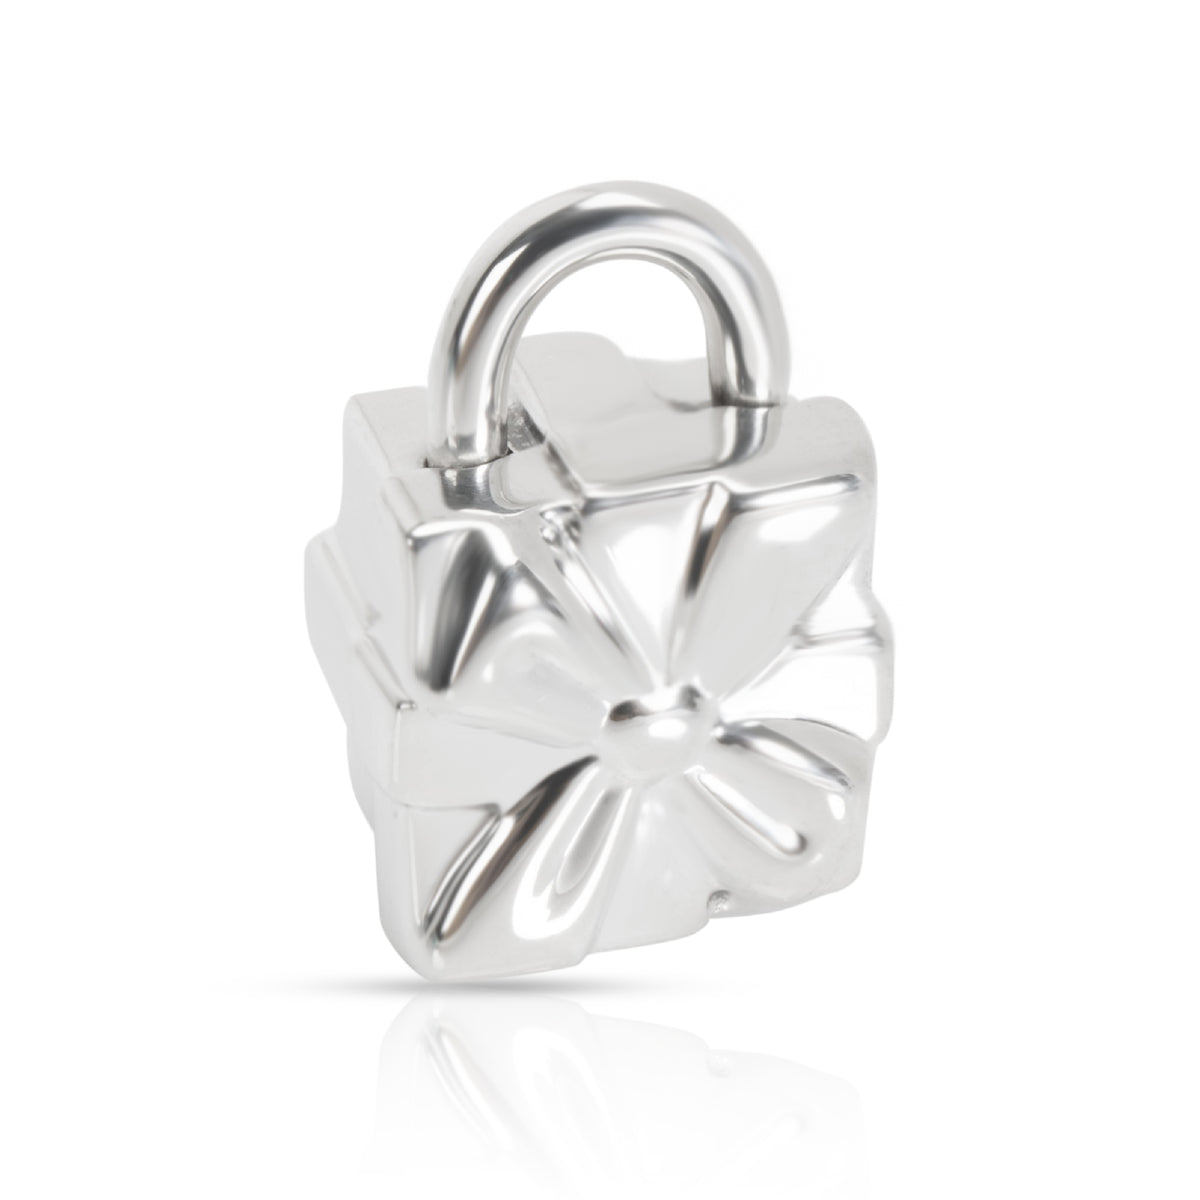 Tiffany & Co. Gift Box Charm in Sterling Silver